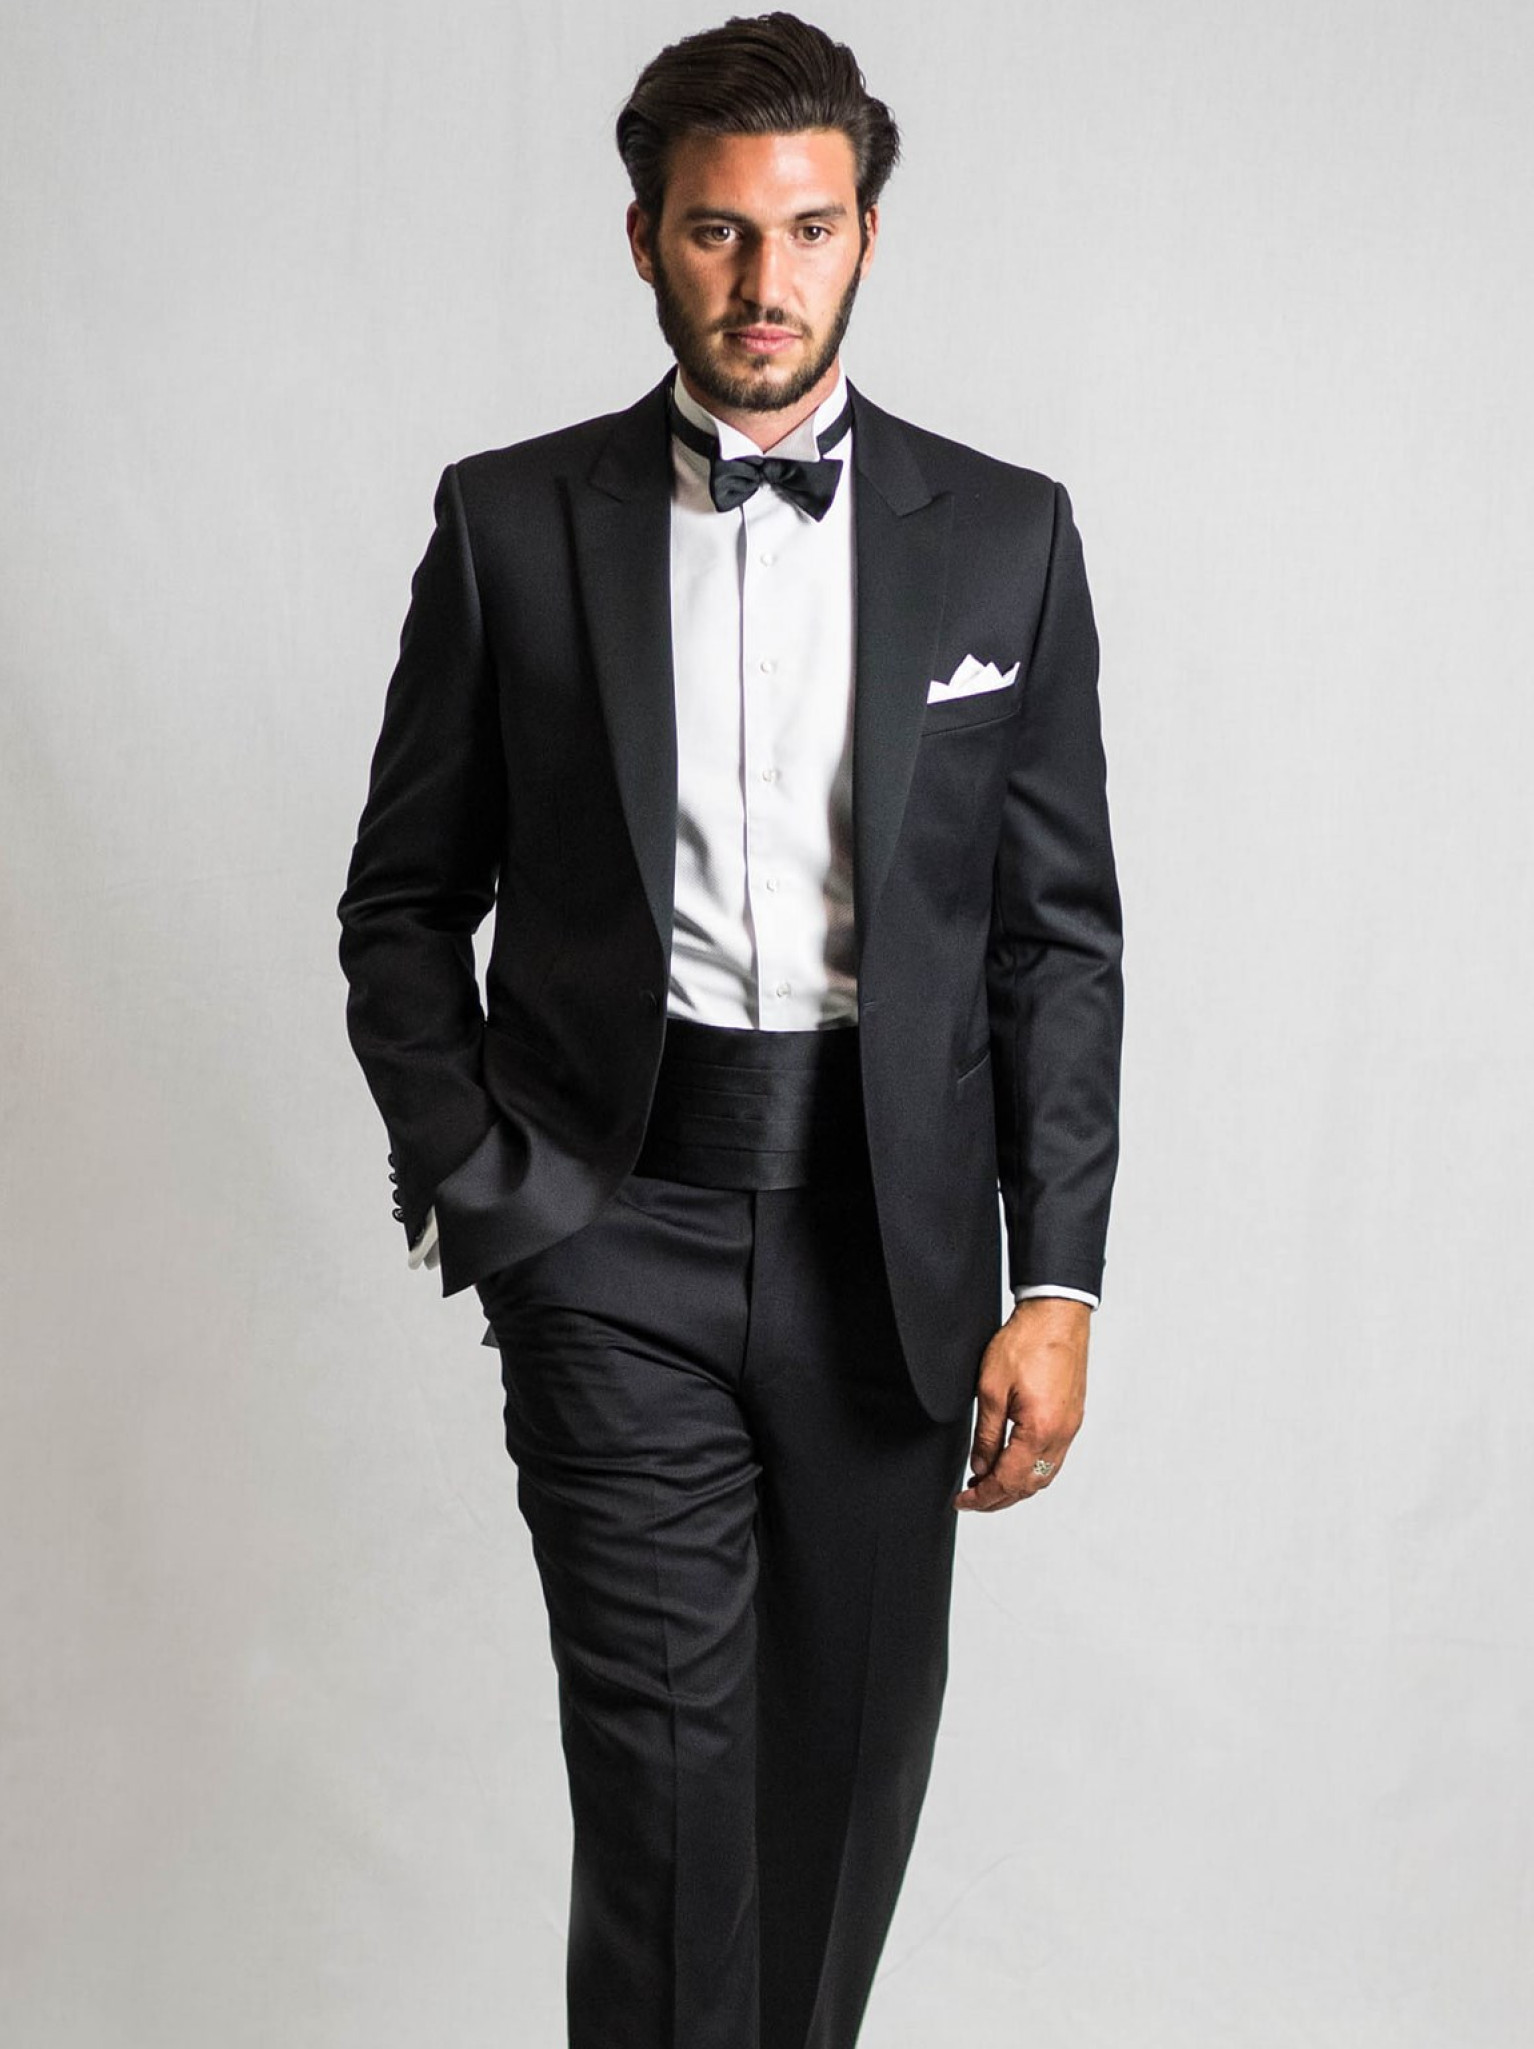 Mens Wedding Suits Nz : The Modern Wedding Style Guide Politix : Check ...